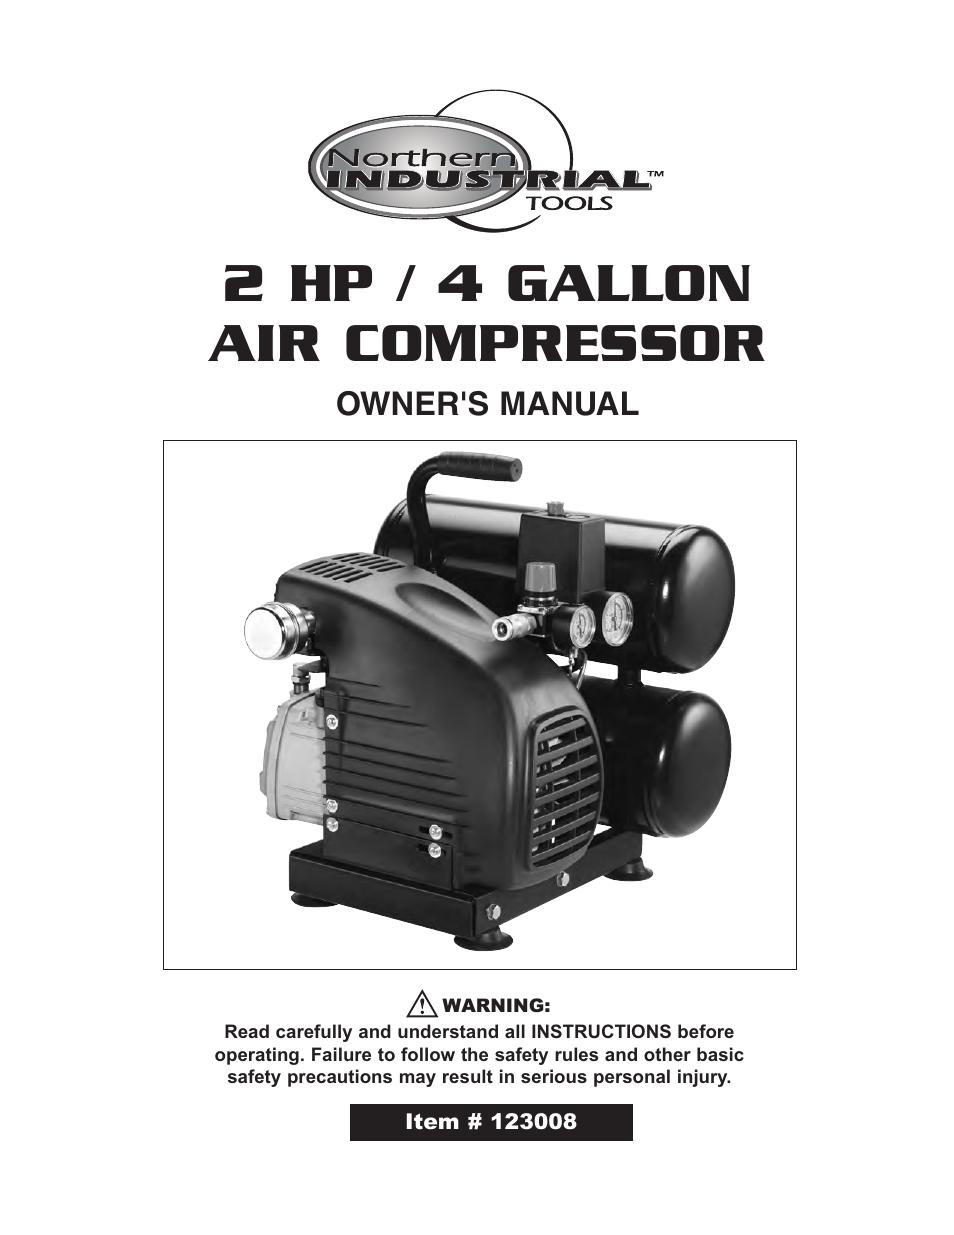 Northern Industrial Tools 2 HP / 4 GALLON AIR COMPRESSOR User Manual | 10 pages